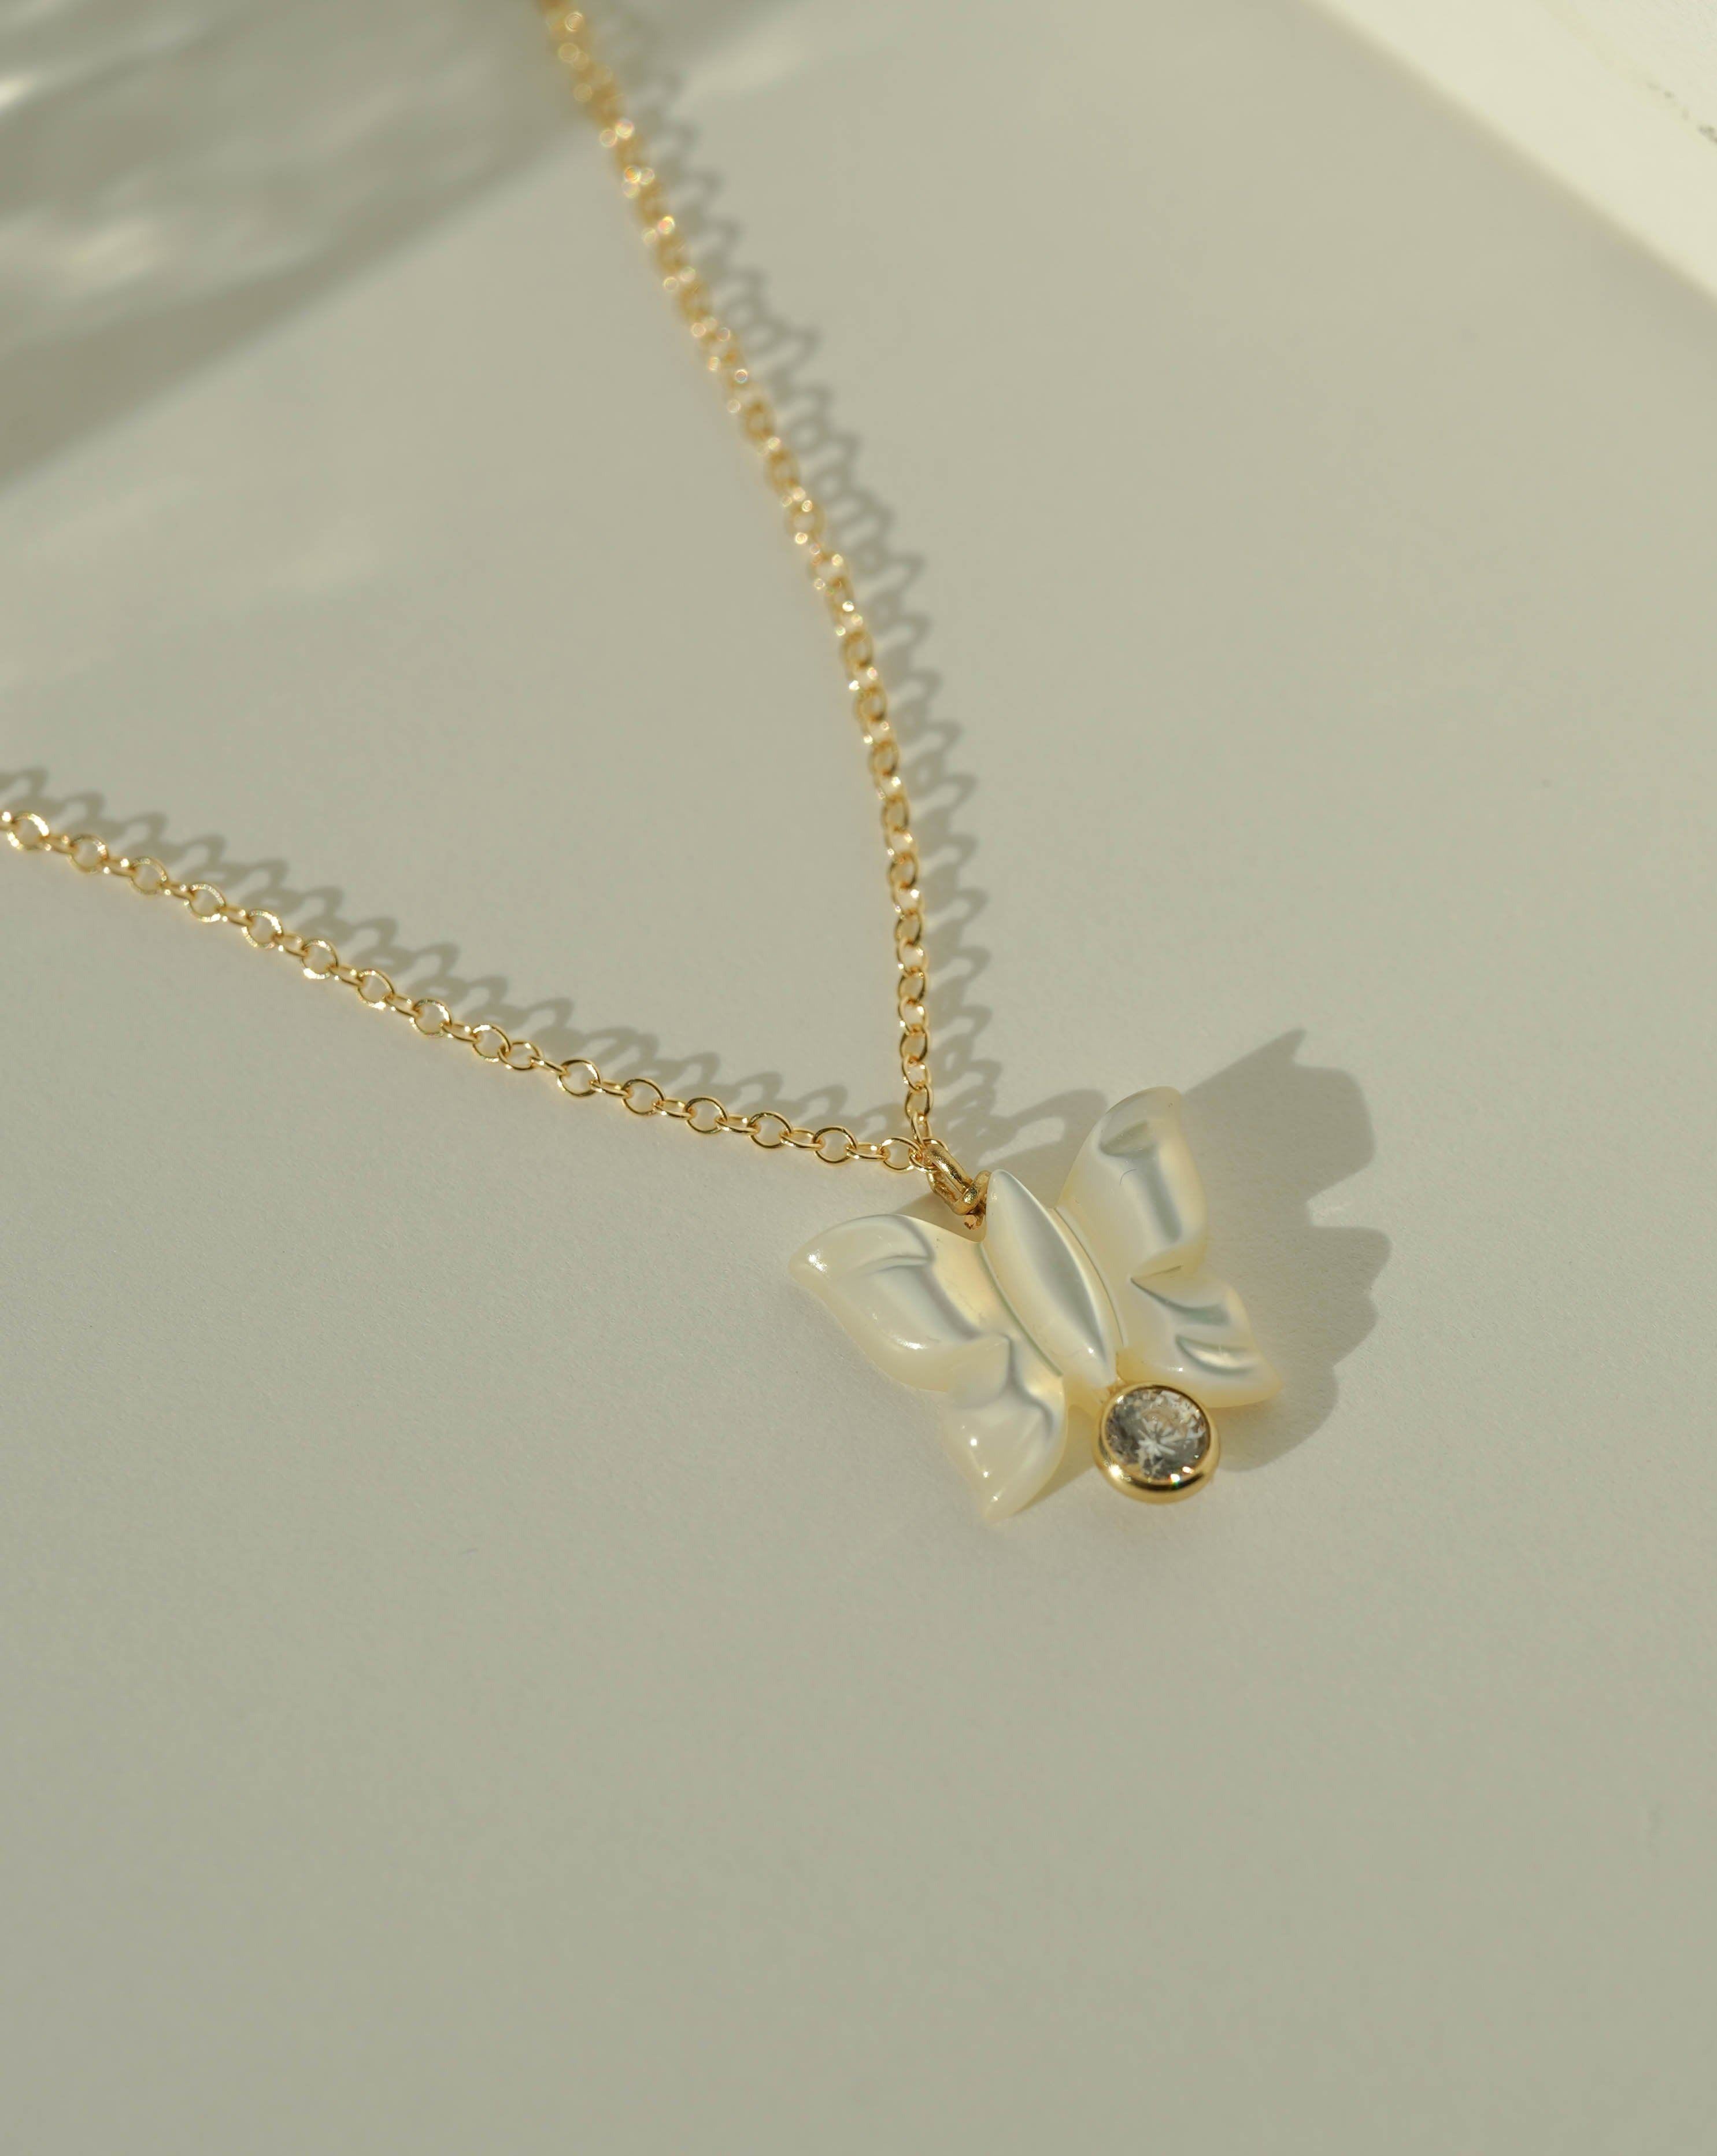 Halo Necklace by KOZAKH. A 16 to 18 inch adjustable length necklace in 14K Gold Filled, featuring a hand-carved Mother of Pearl butterfly charm and a 3mm Cubic Zirconia bezel.